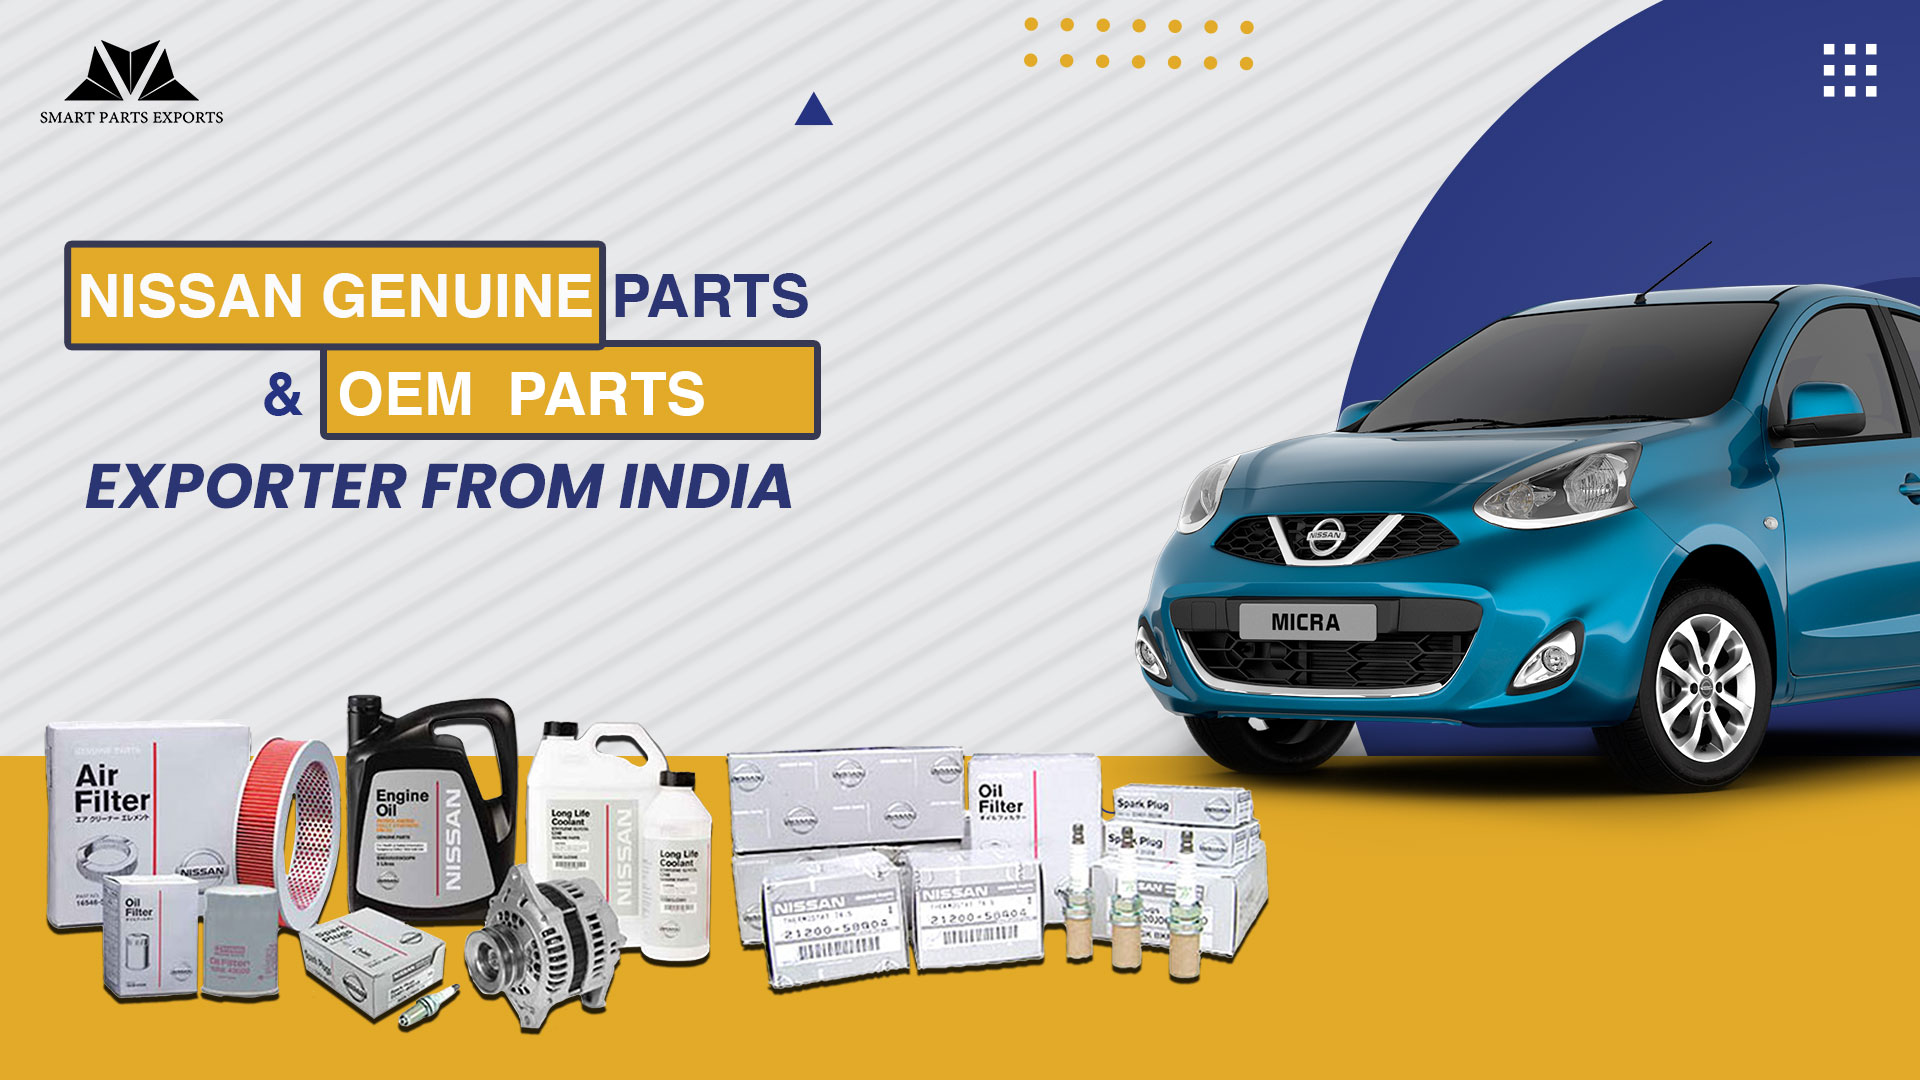 Nissan Genuine Parts & OEM Parts Exporter from India